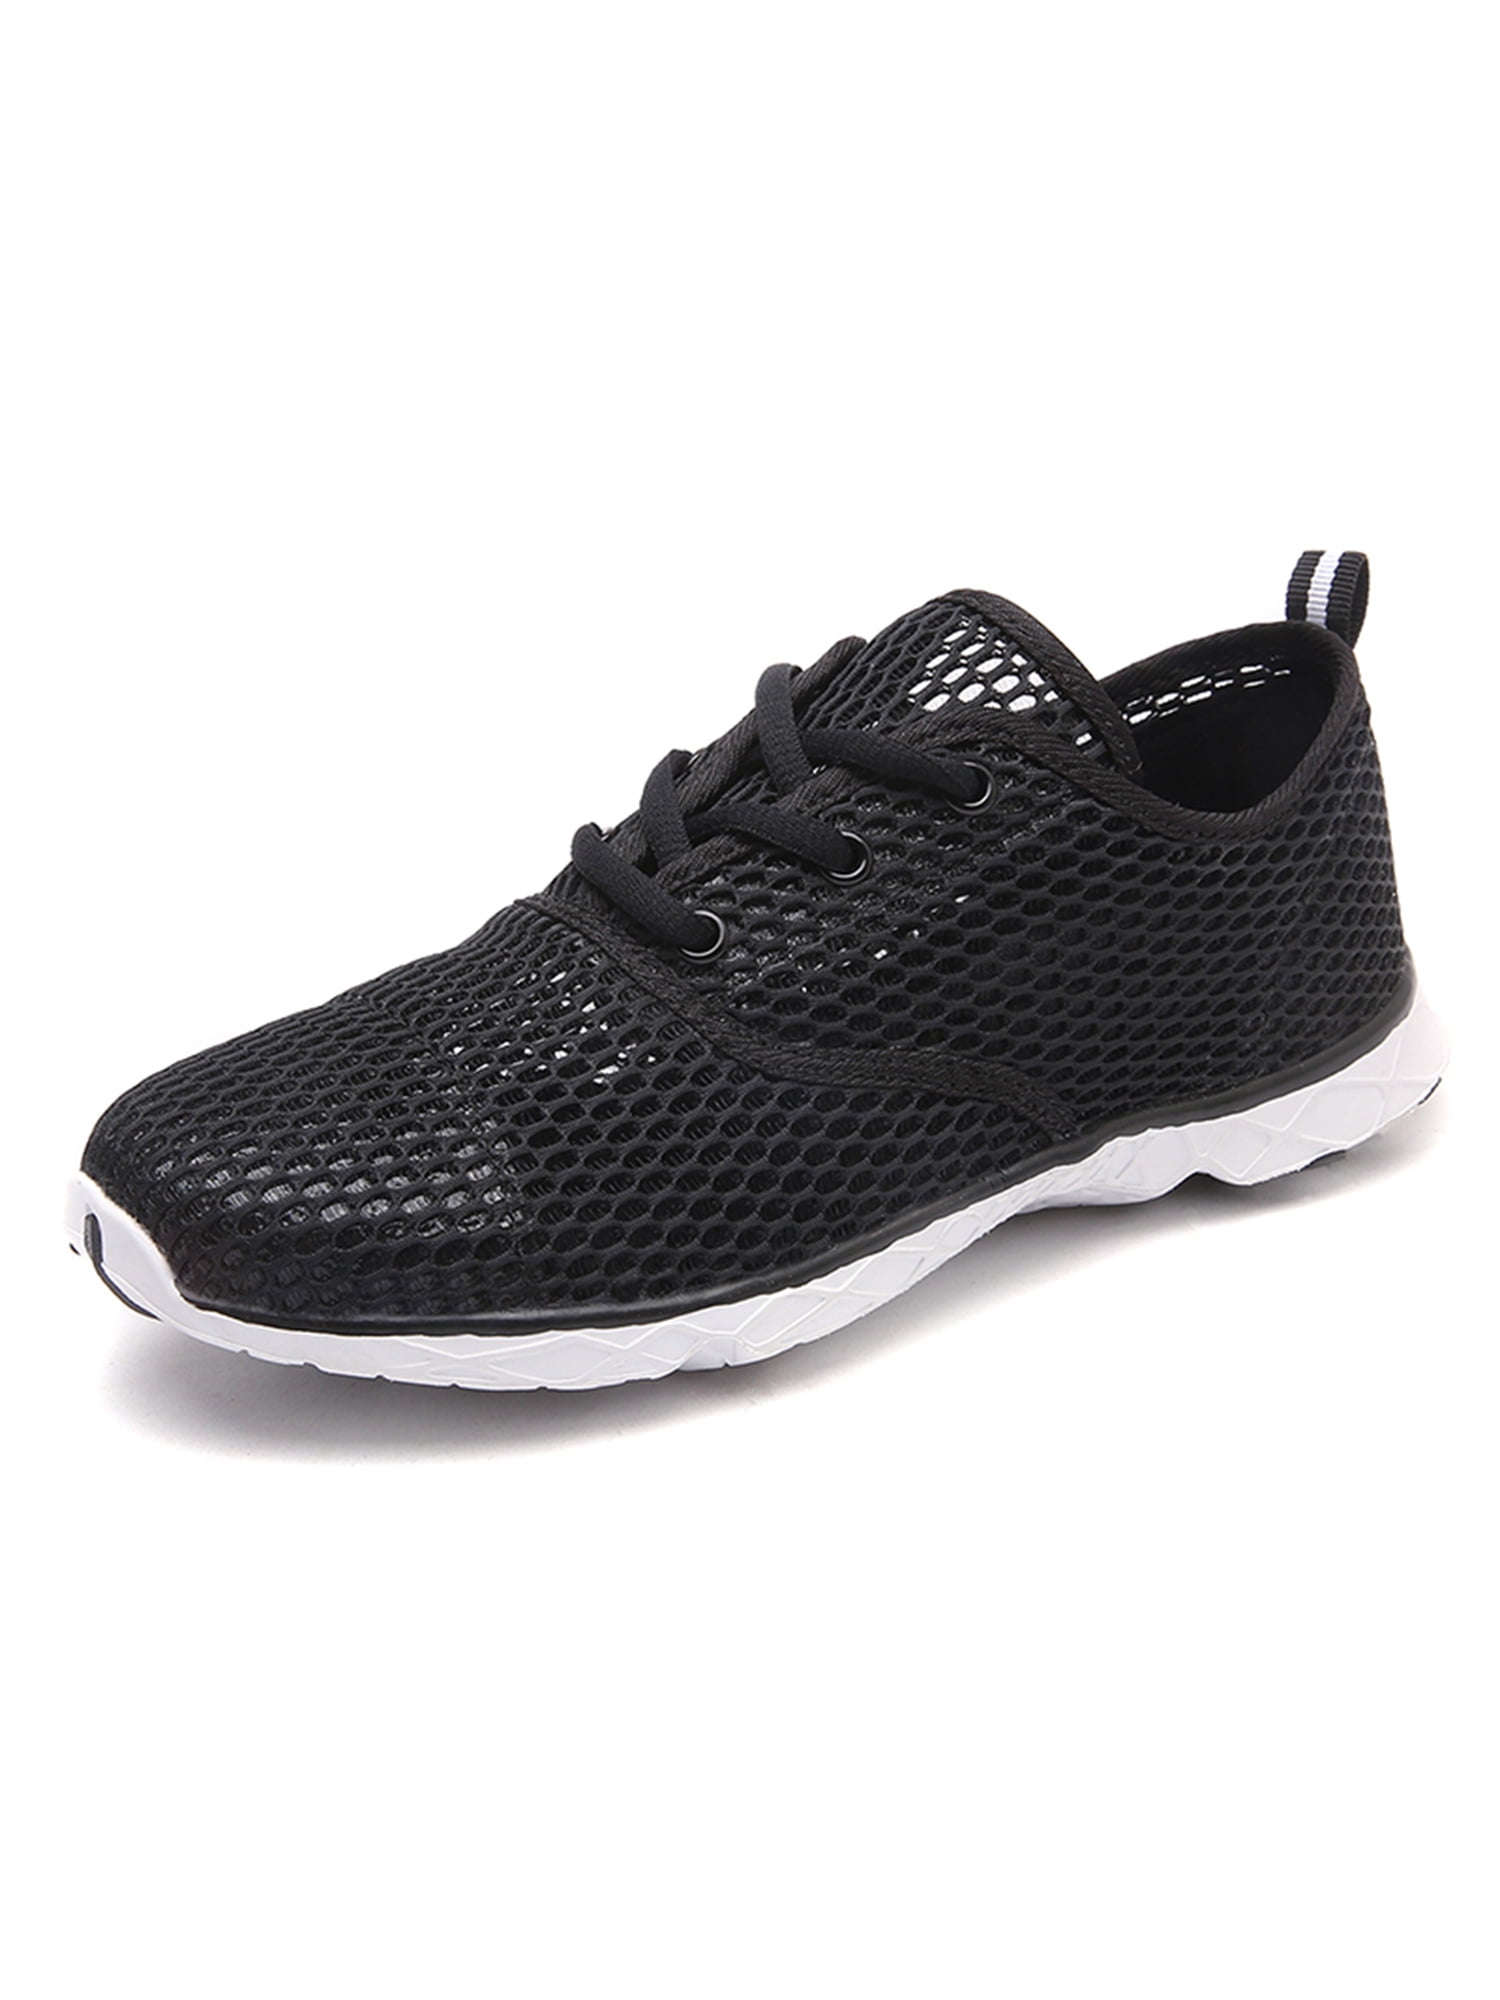 Men Wading Shoes Breathable Water Shoes 